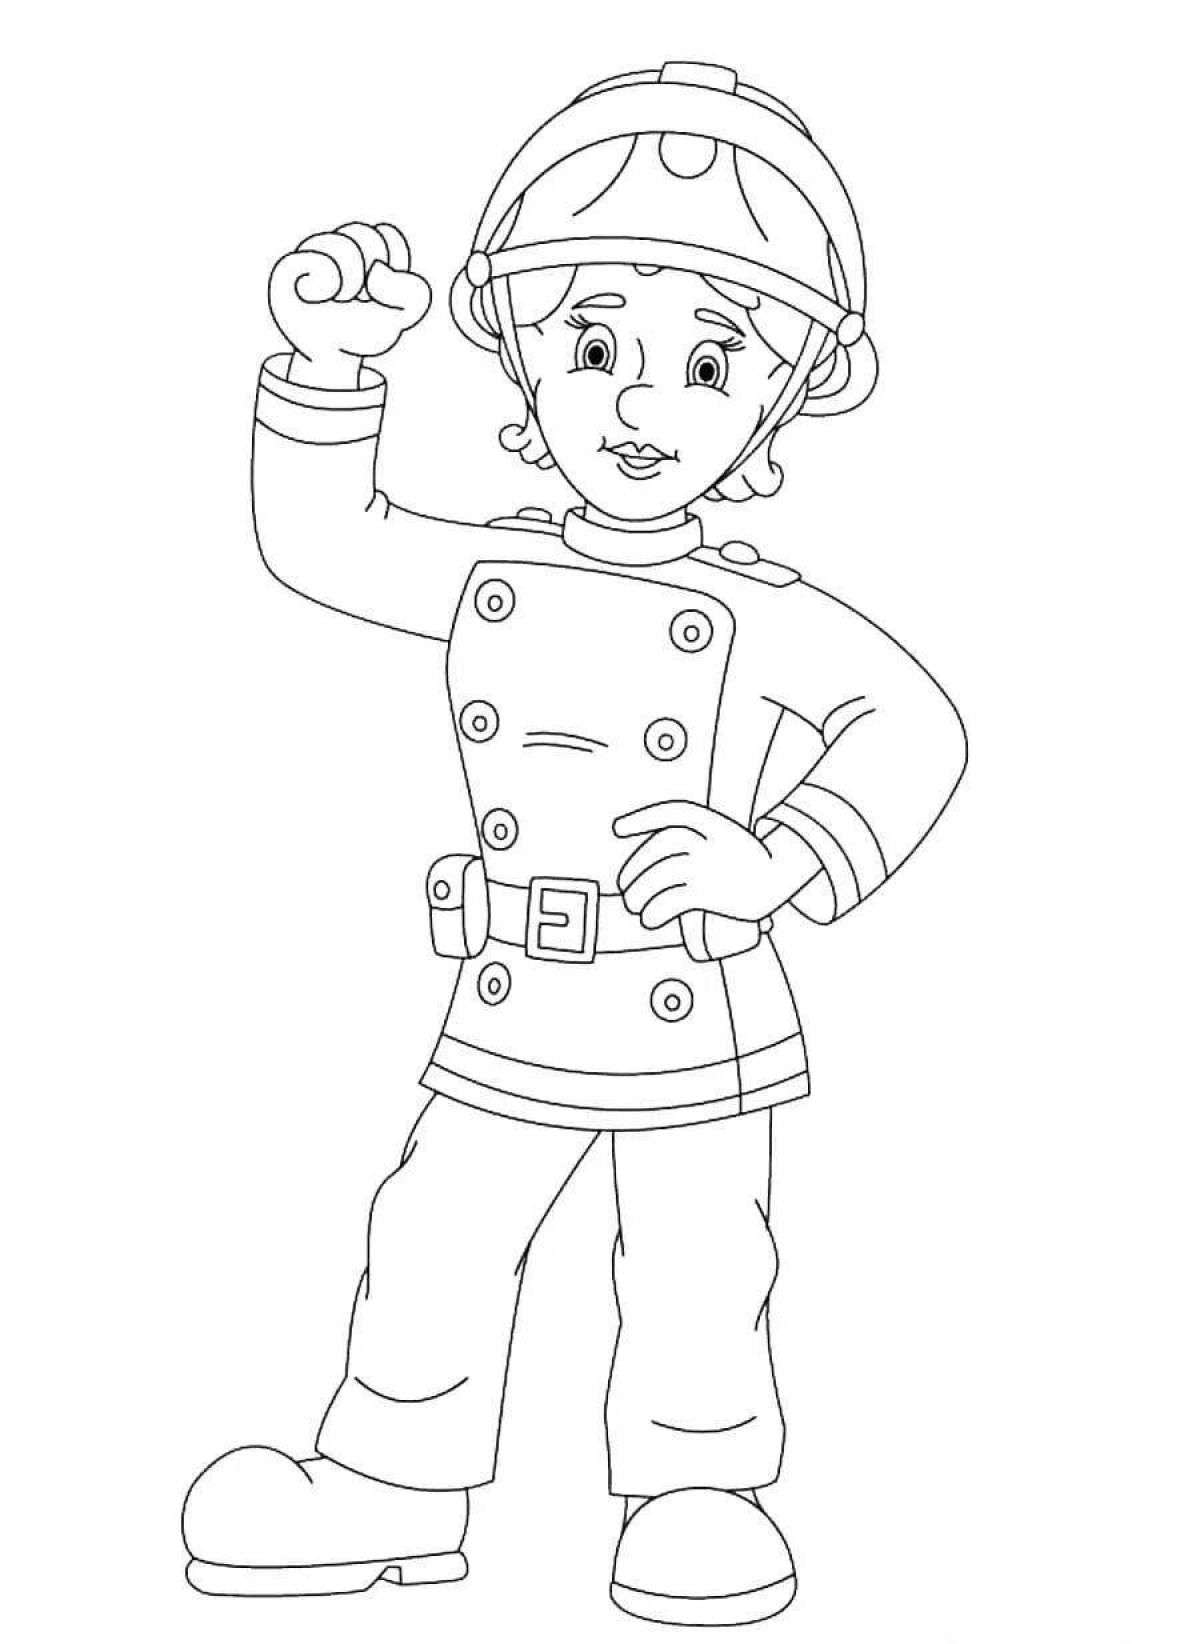 Amazing firefighter coloring book for kids